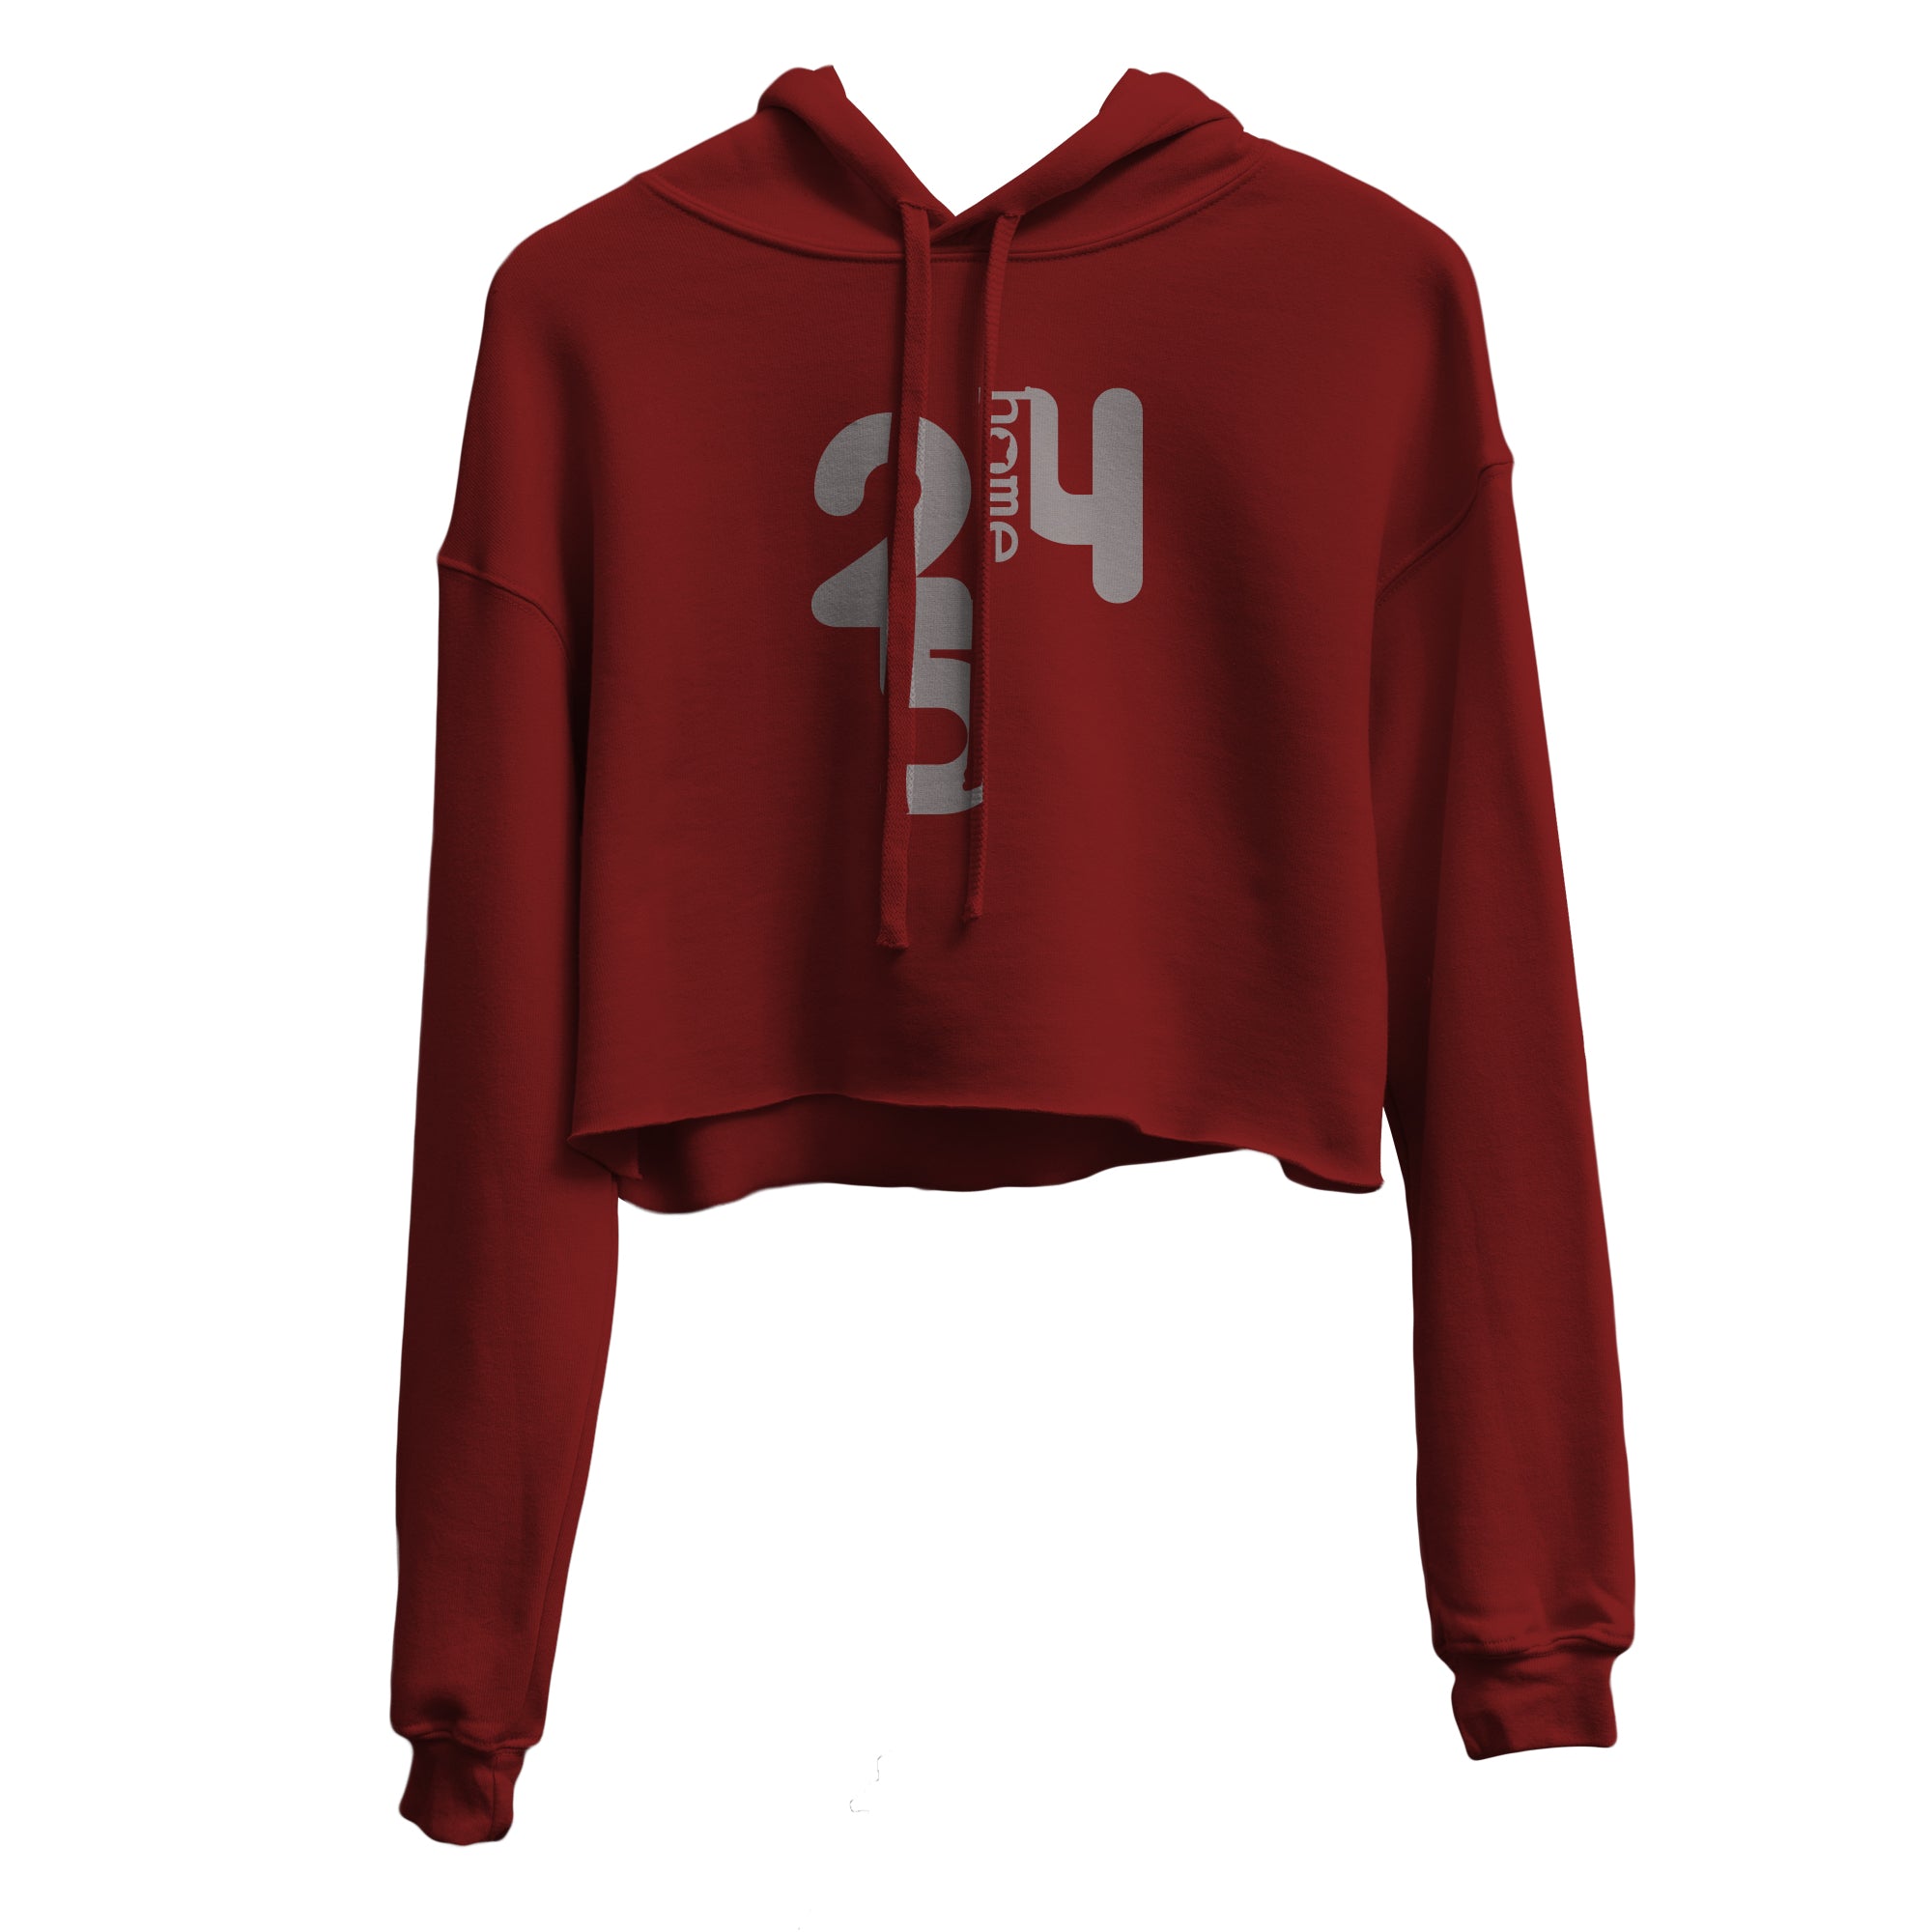 JBEEJURA DESINGZ | home_254 burgundy Cropped Hoodie (mid heavy fabric) with a silver the 254 logo